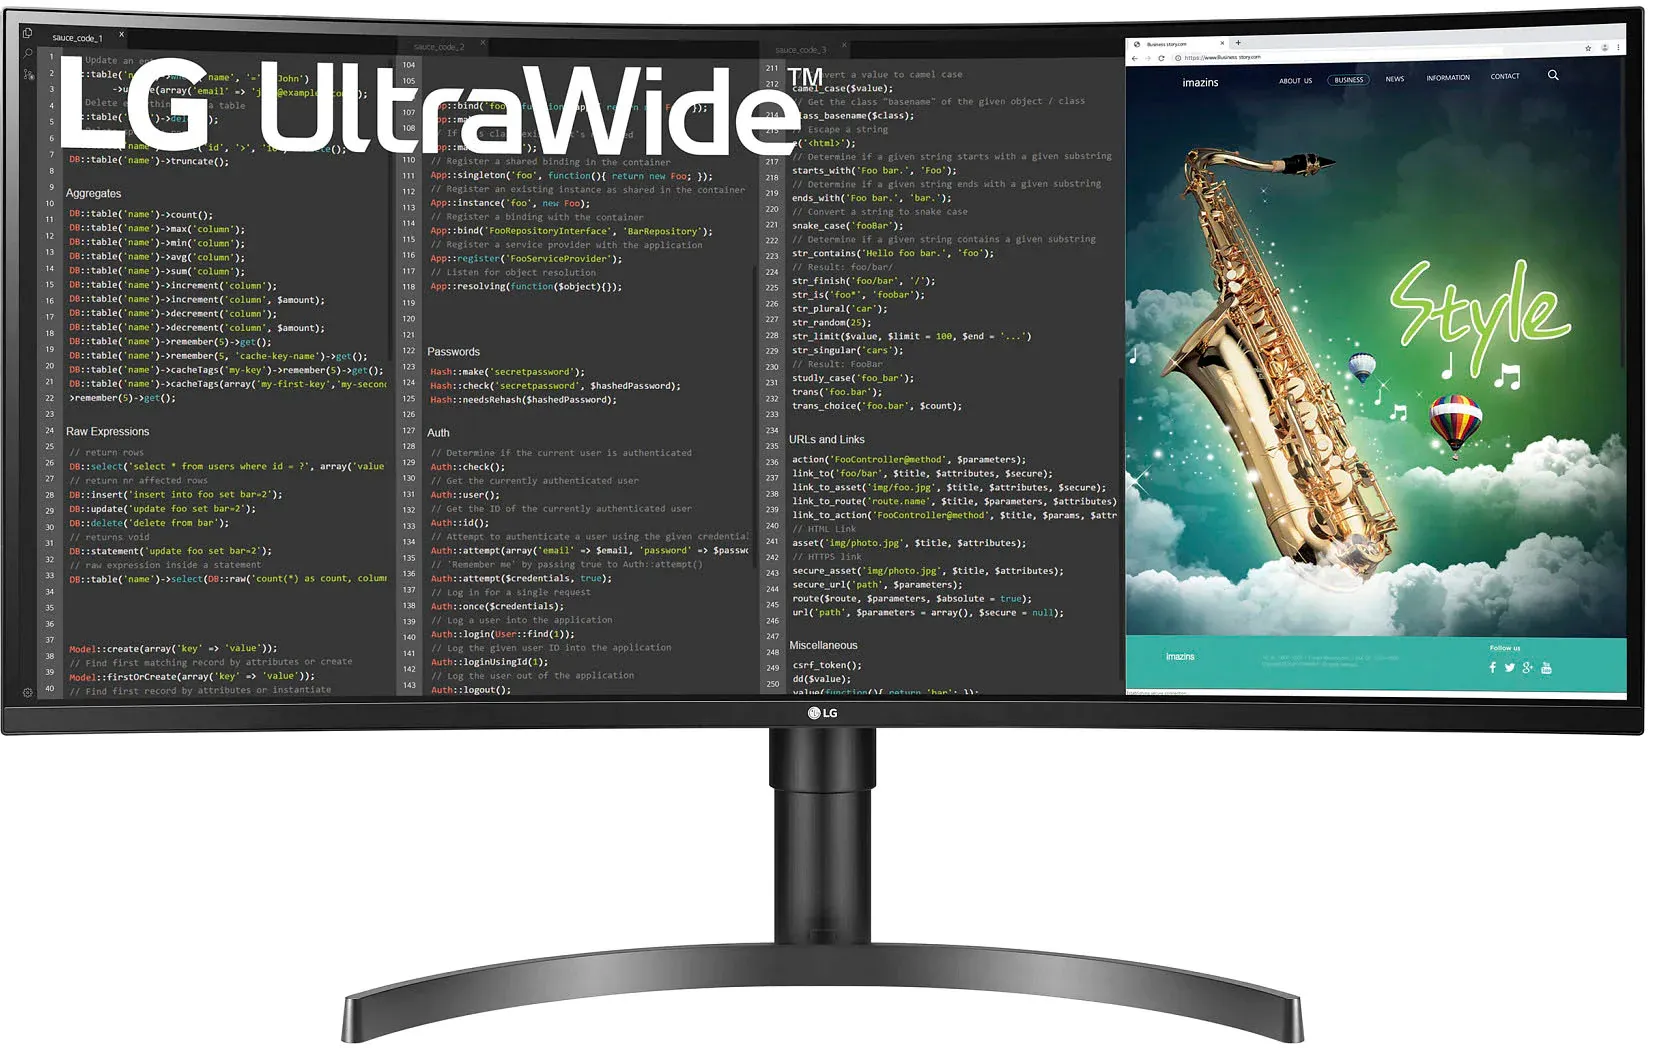 Ultra-wide monitors are ideal for a lot of people because they enable a new level of productivity. Because they're so wide, it becomes that much easier to run multiple apps side-by-side, so you can get work done more efficiently. This one comes with a sharp QHD panel, a 100Hz refresh rate, and it connects easily with a single USB-C cable for extra convenience.